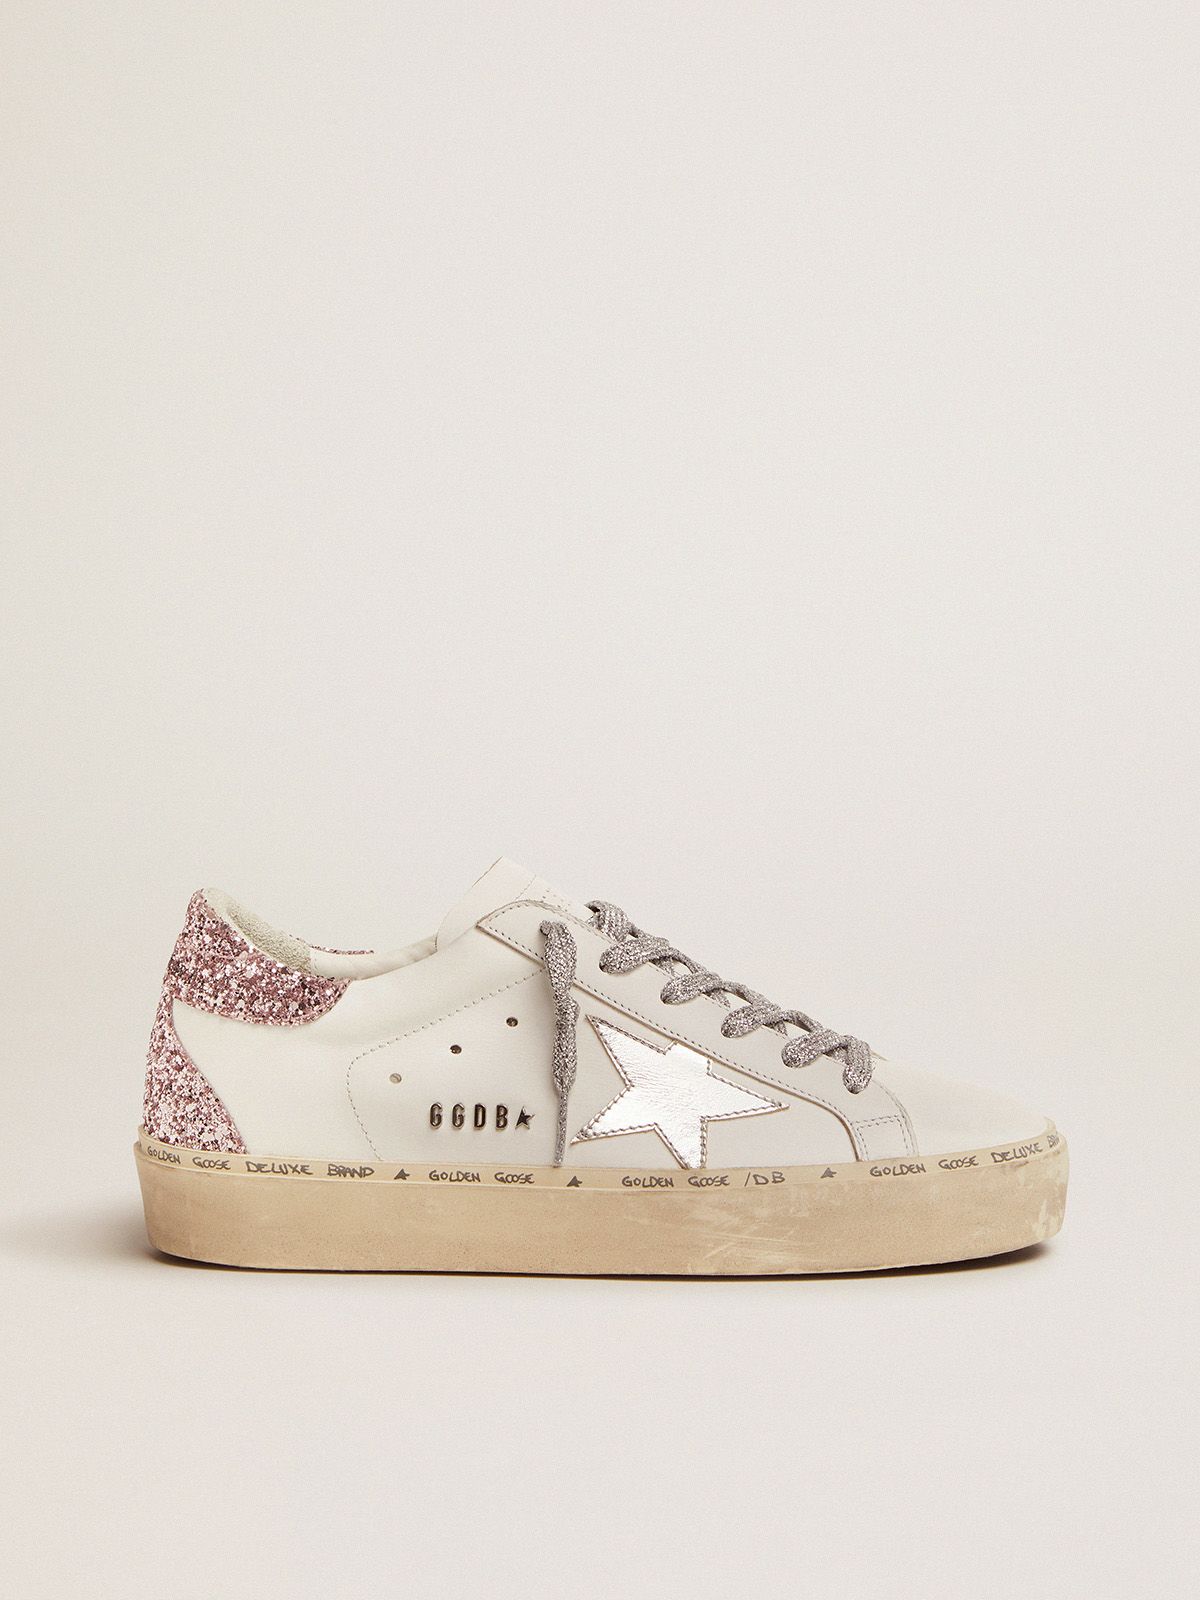 Hi Star Sneakers With Silver Laminated Leather Star And Quartz Pink Glitter Heel Tab Golden Goose